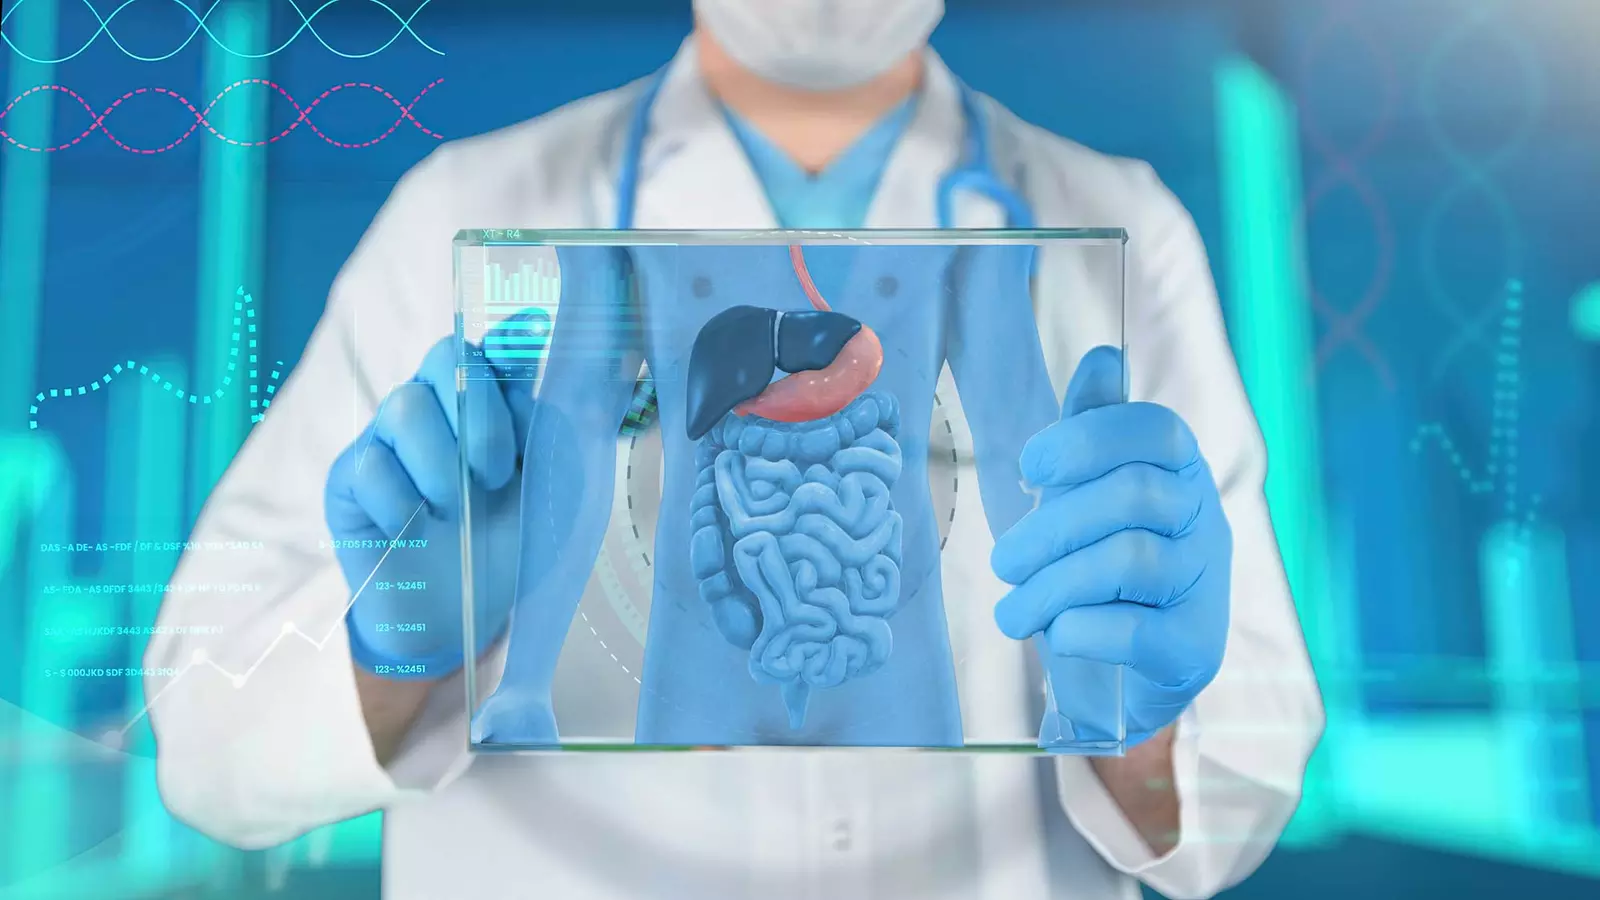 A doctor using an electronic device to view a patient's digestive organs